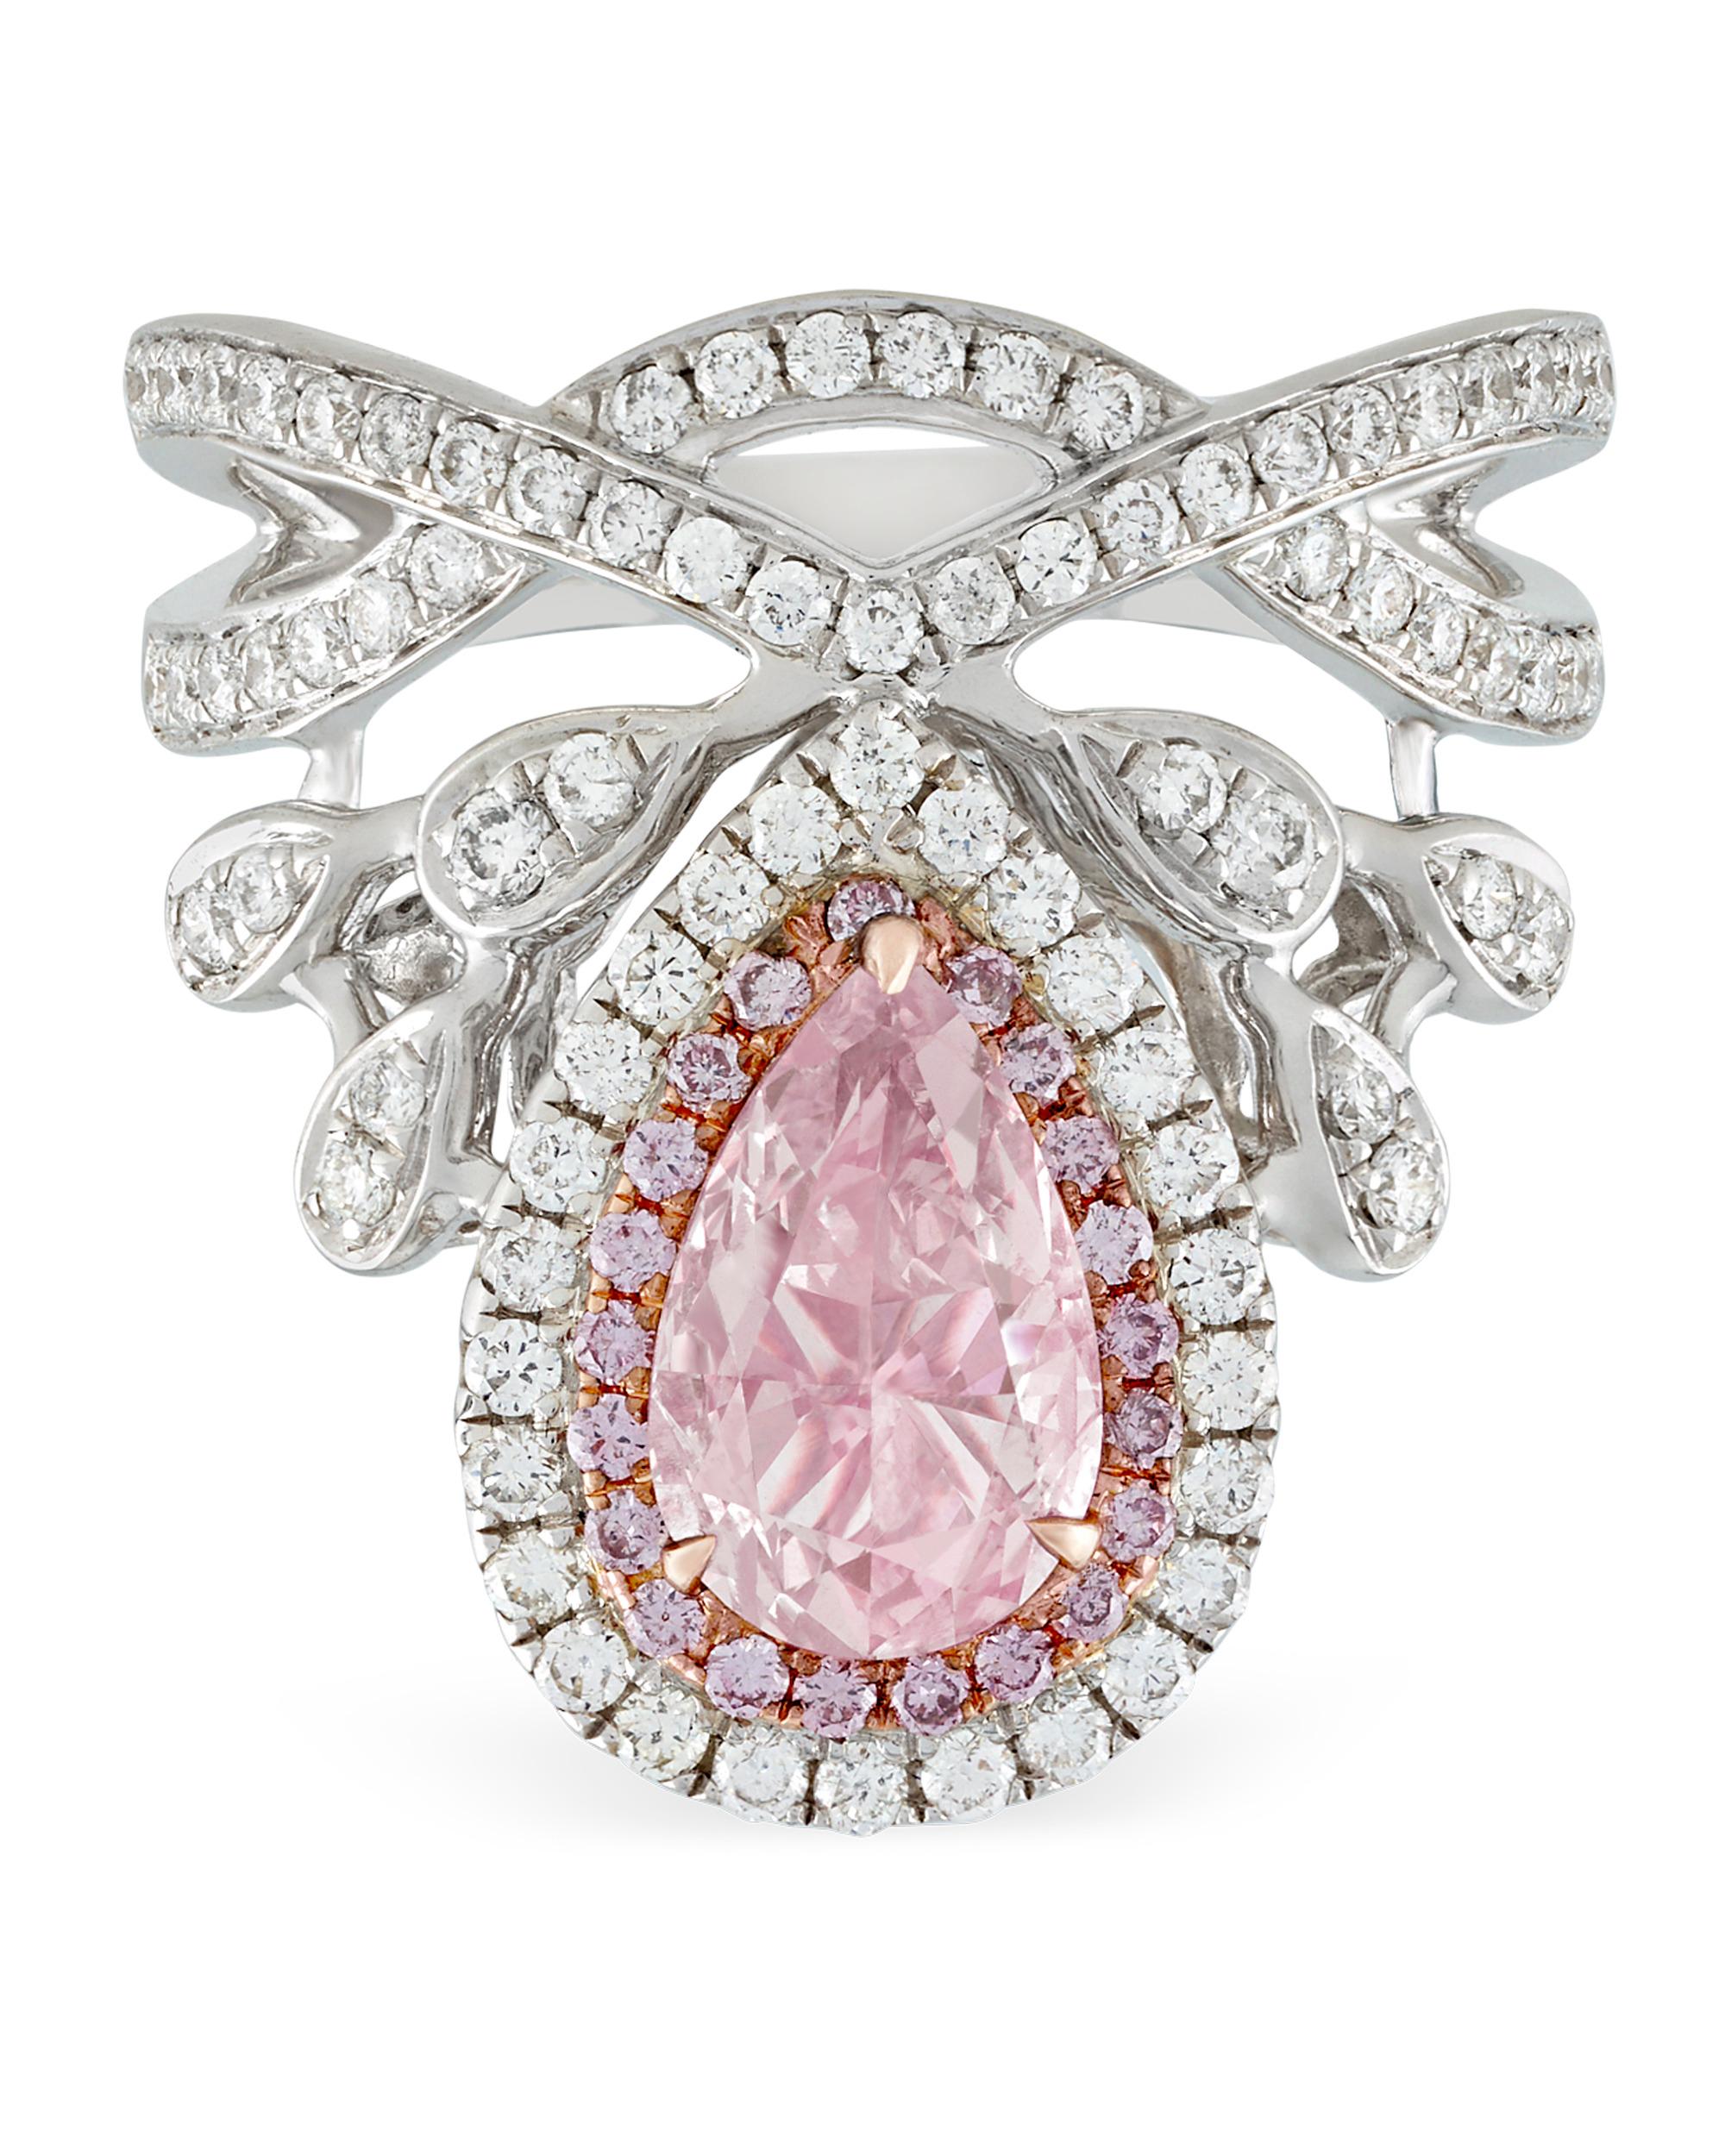 An incredible natural fancy light orangy pink diamond centers this regal, hand-crafted crown ring. The .99-carat pear-shaped rarity is accentuated by white diamonds totaling .62 carats and additional fancy colored diamonds weighing 1.12 carats. The